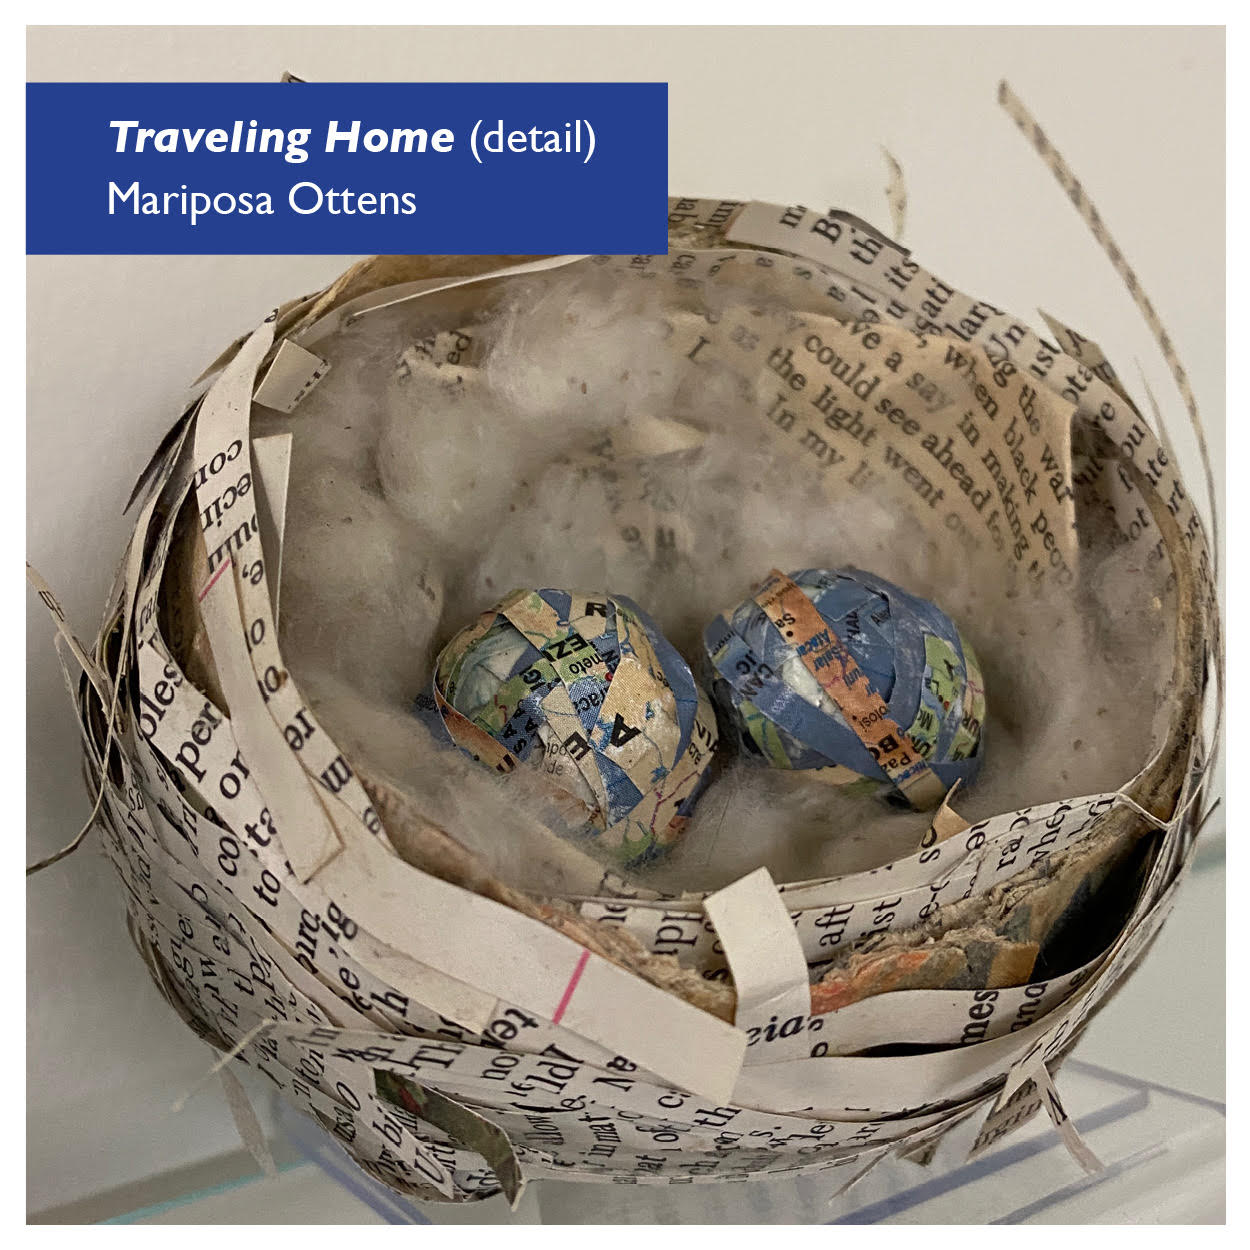 A artist's rendition of a birds nest using strips of paper repurposed from a book. The nest is lined with soft fibers and two "eggs" made of strips of maps rest within. Artist: Mariposa Ottens. Image © and used by permission.